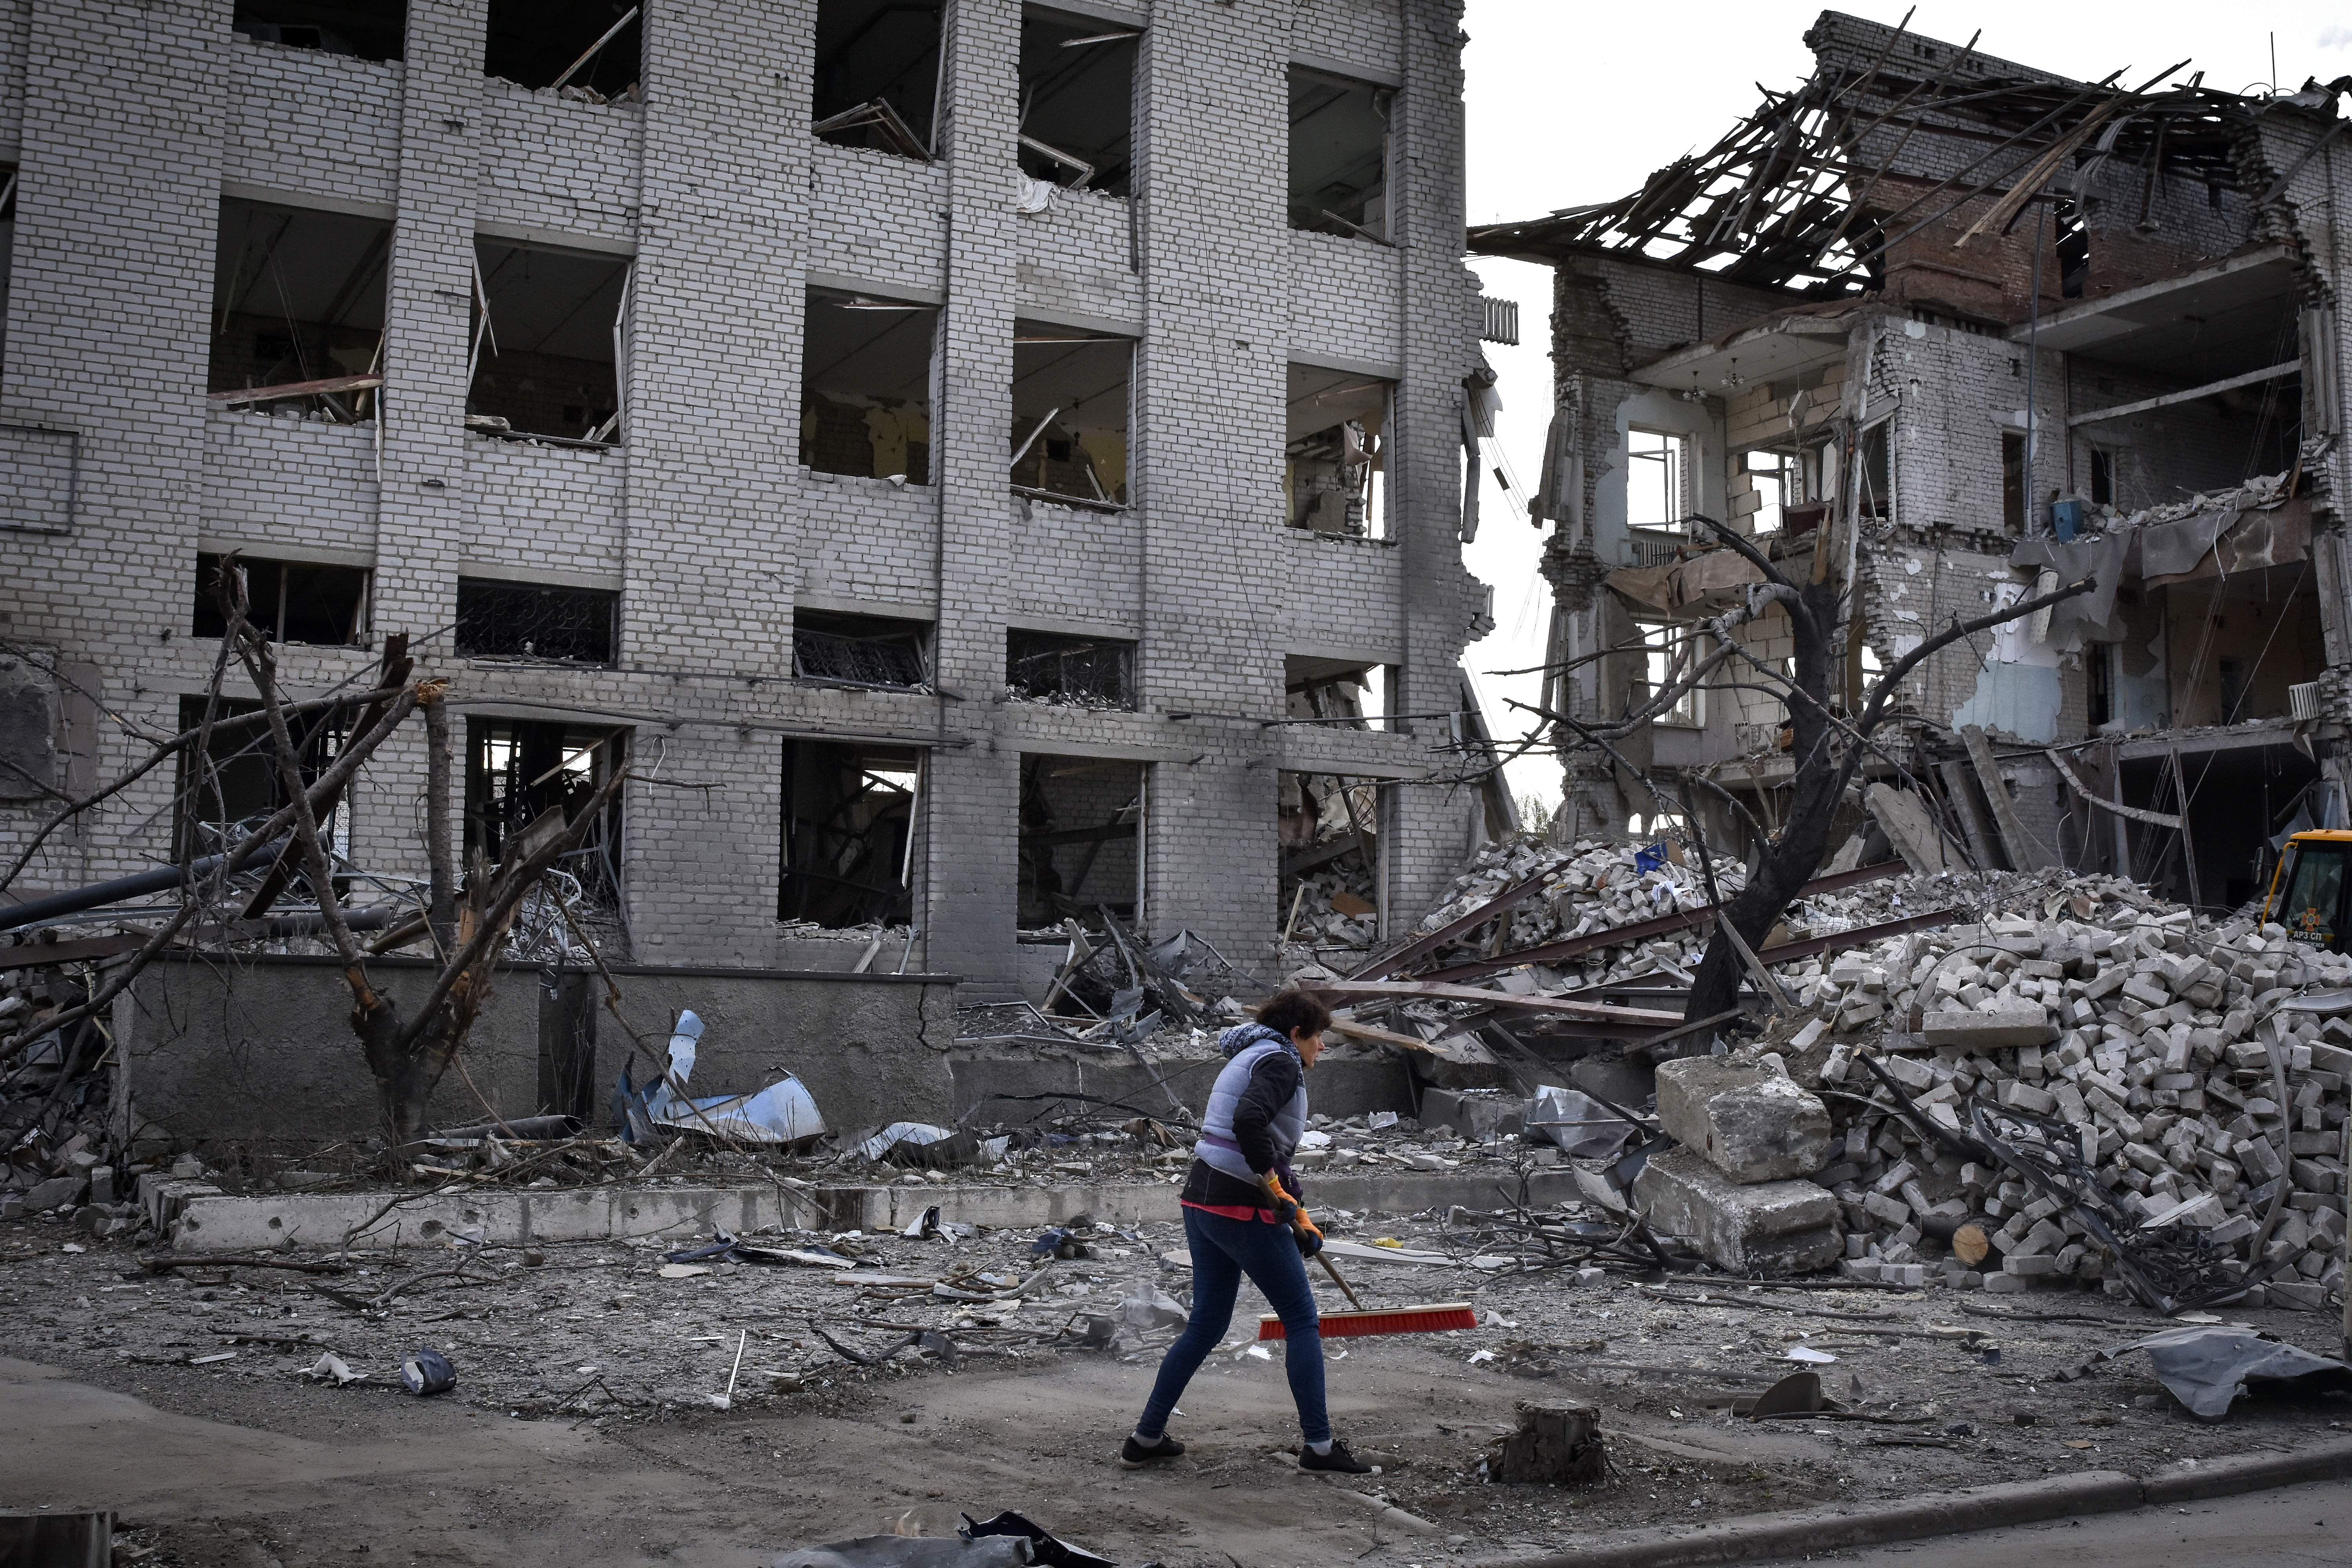 A person removes the rubble of a building in the Zaporizhia region damaged by a Russian airstrike. This photo was taken in April.